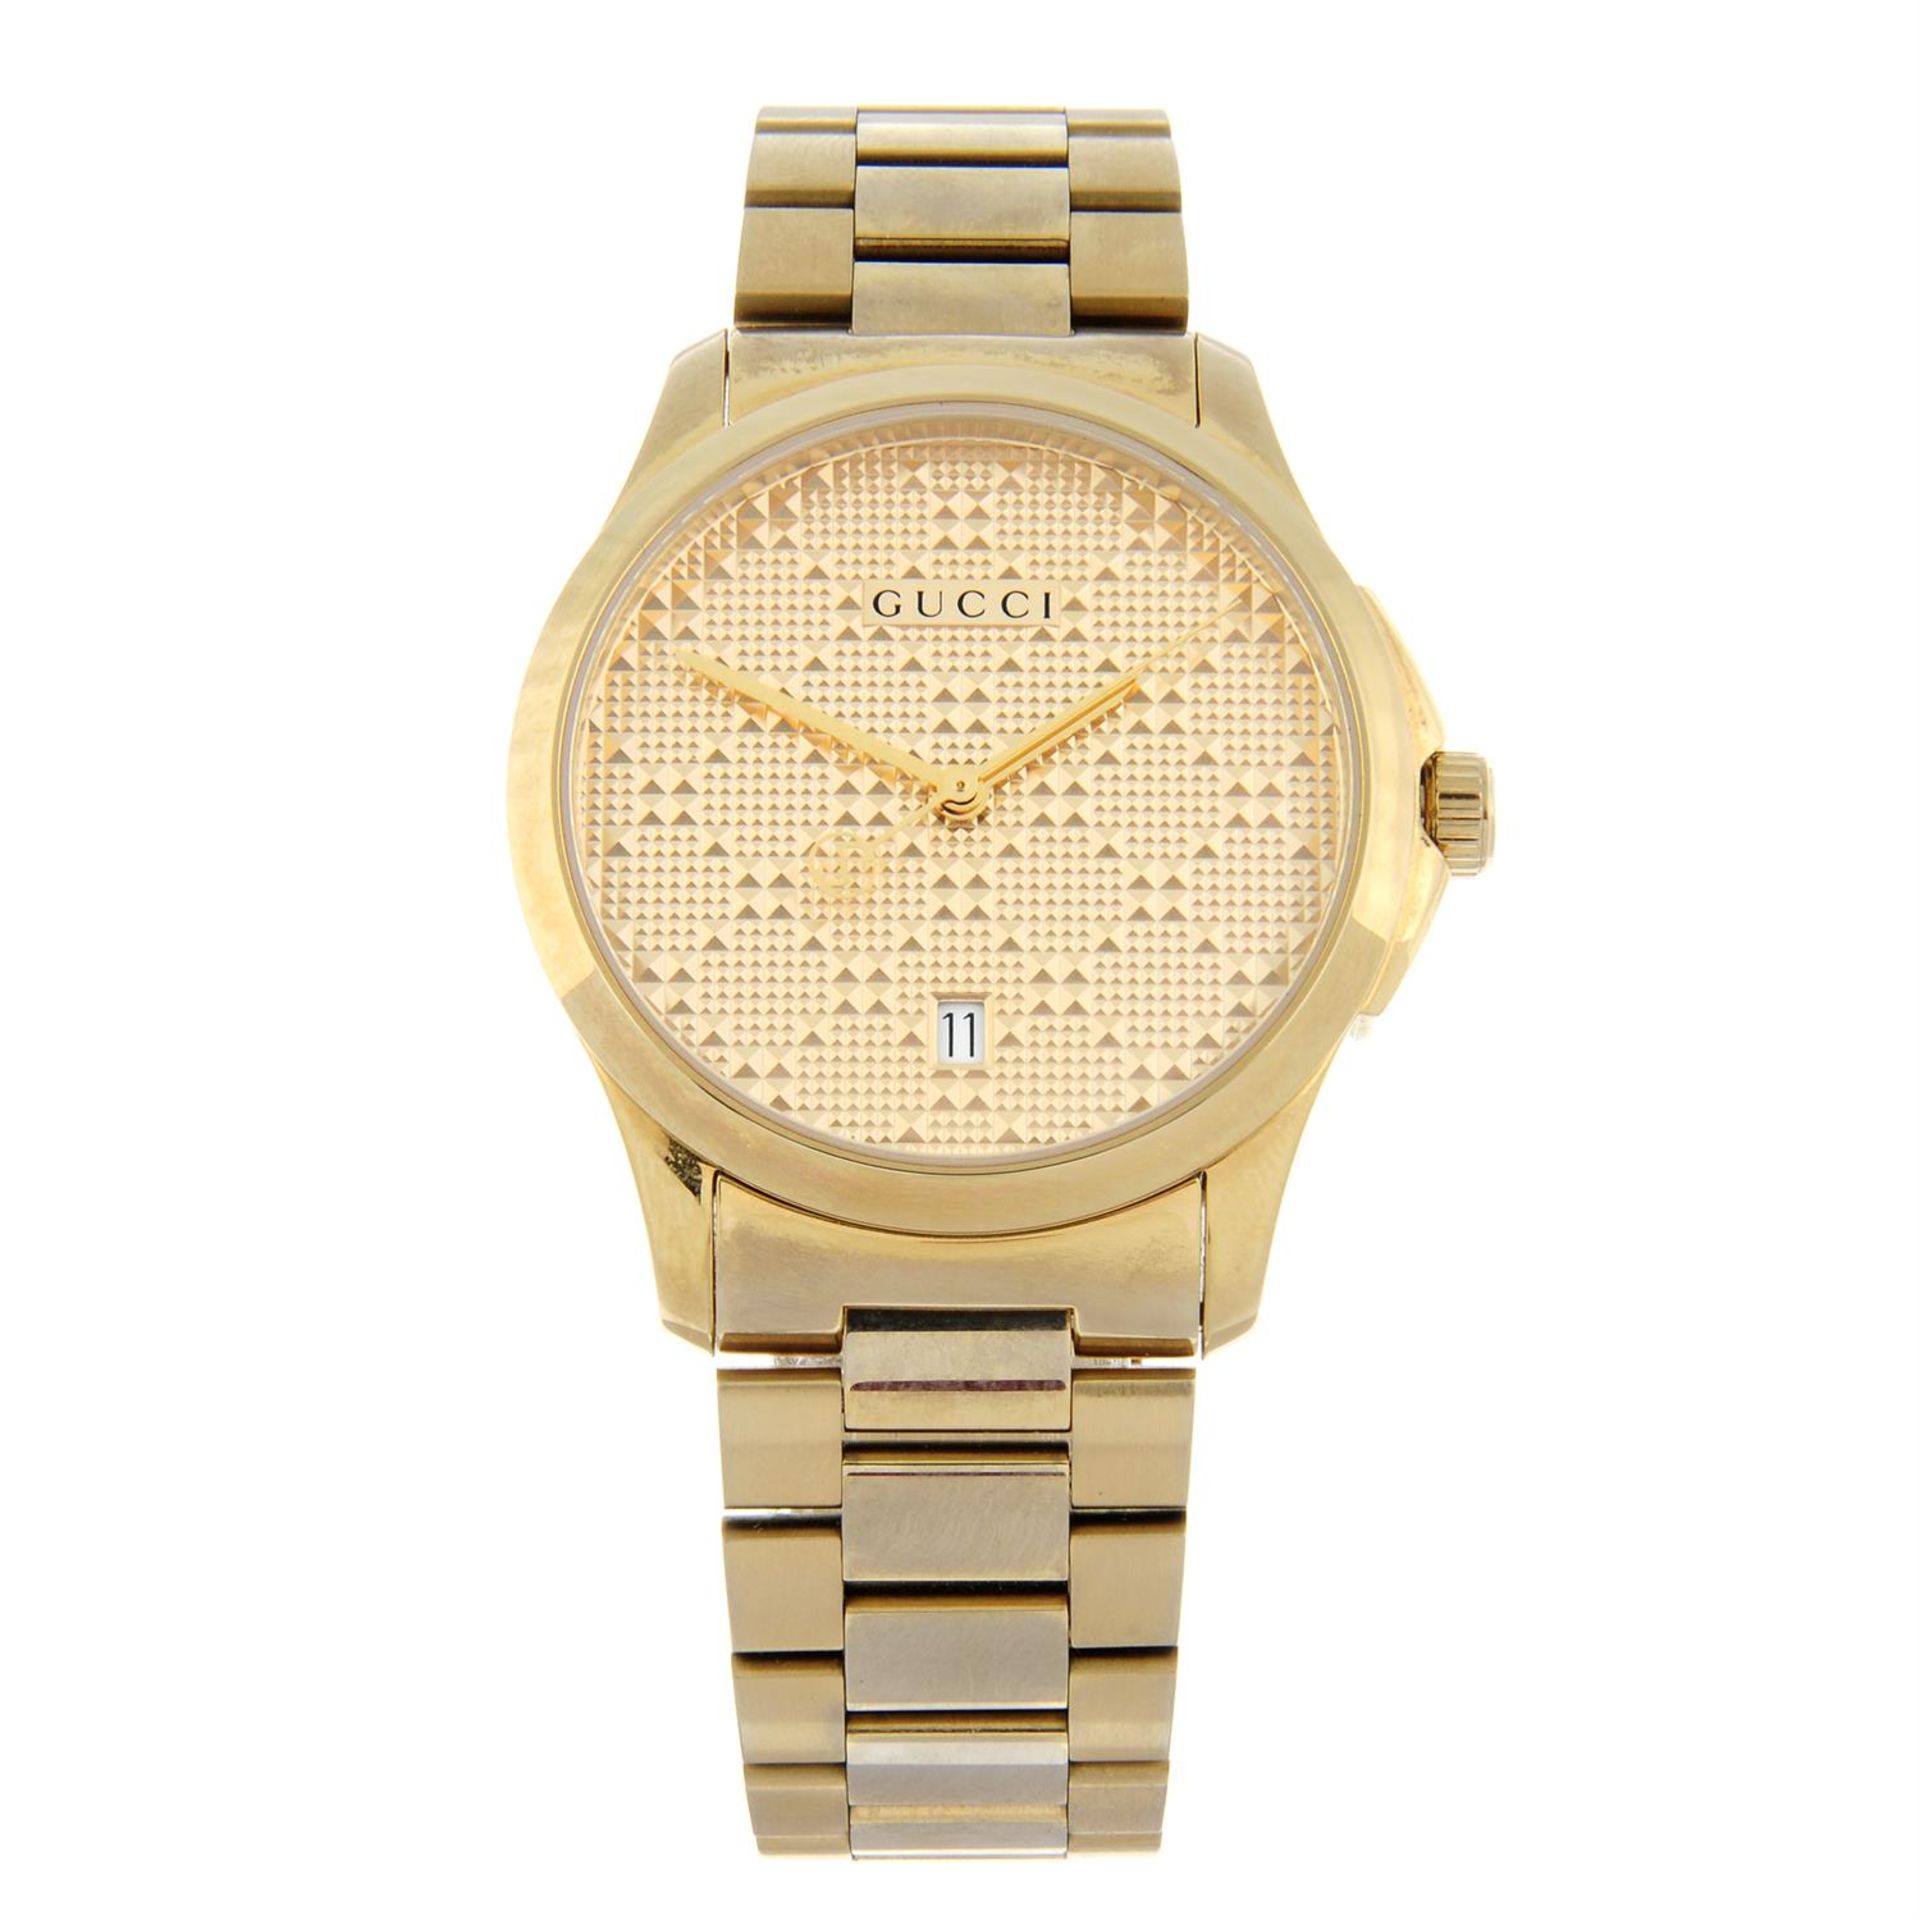 GUCCI - a gold plated 126.4 bracelet watch, 38mm.